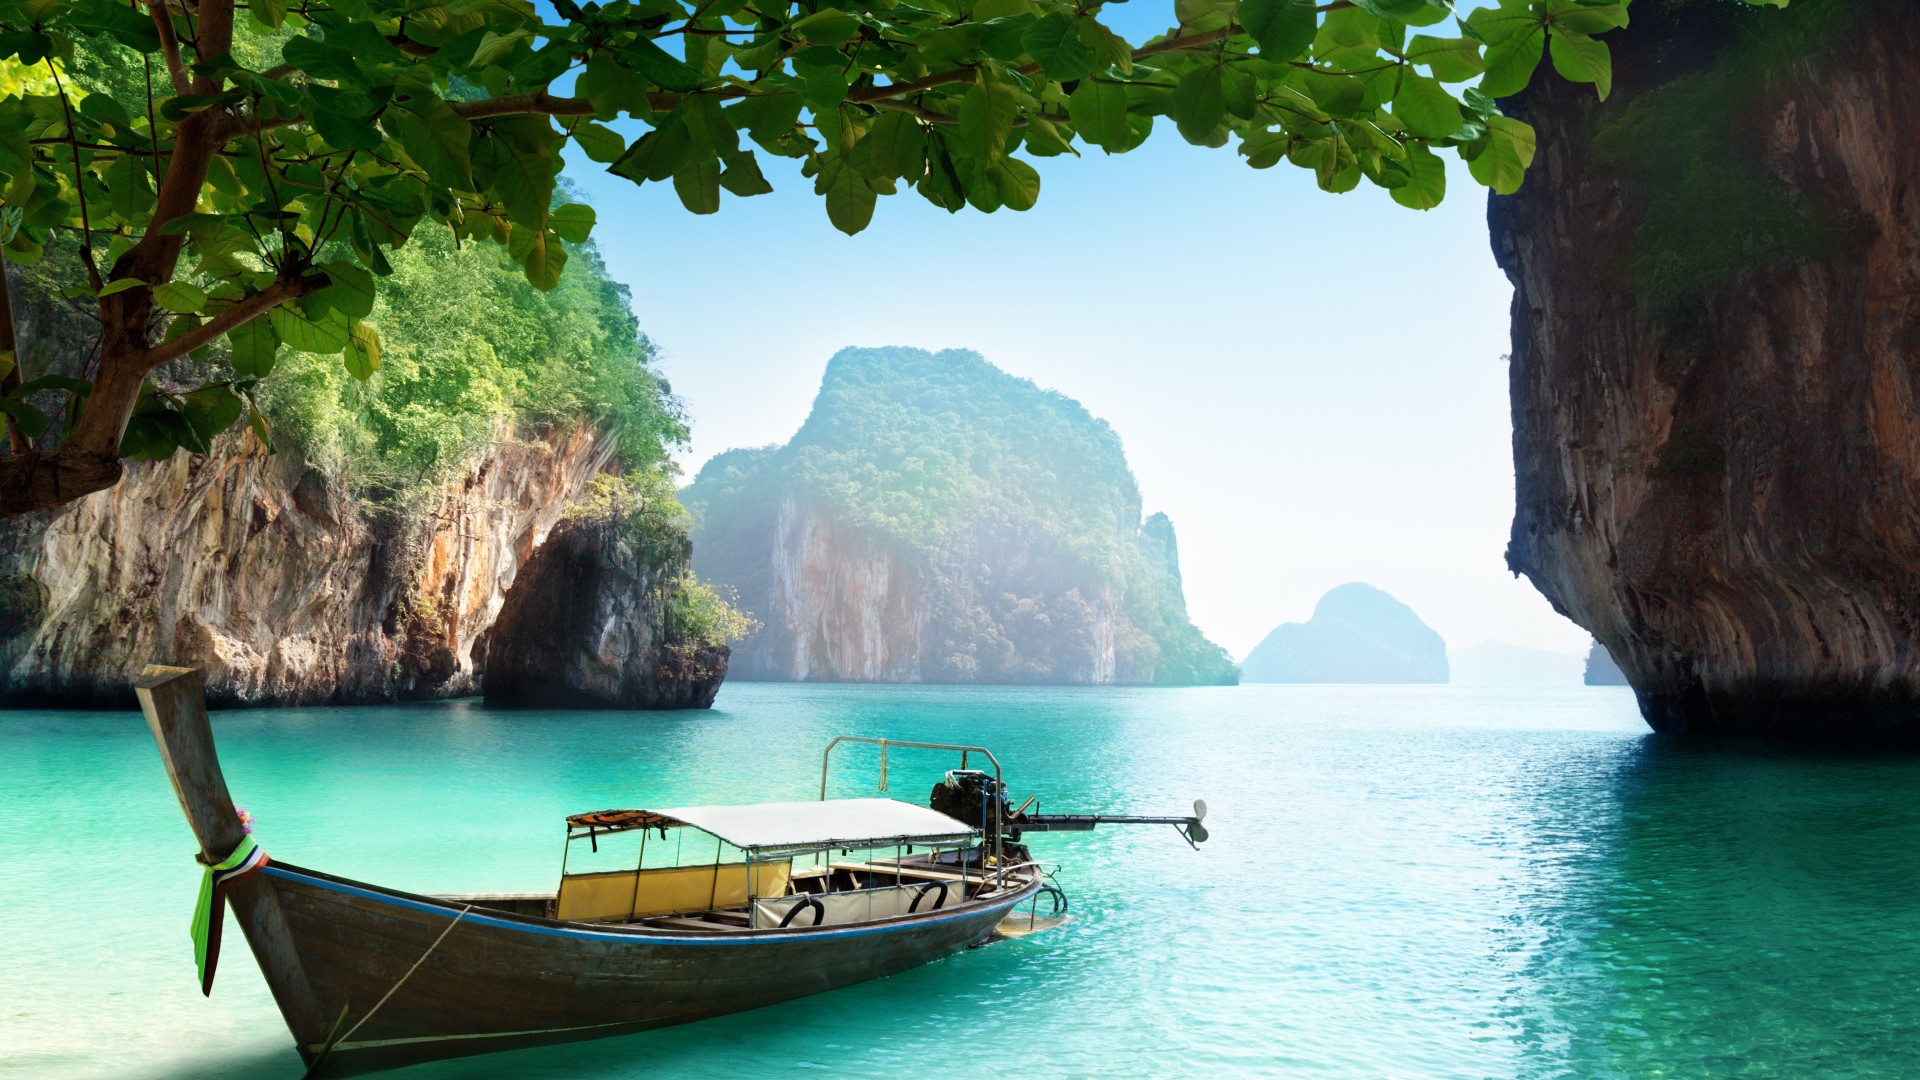 Thailand Wallpapers | Best Wallpapers